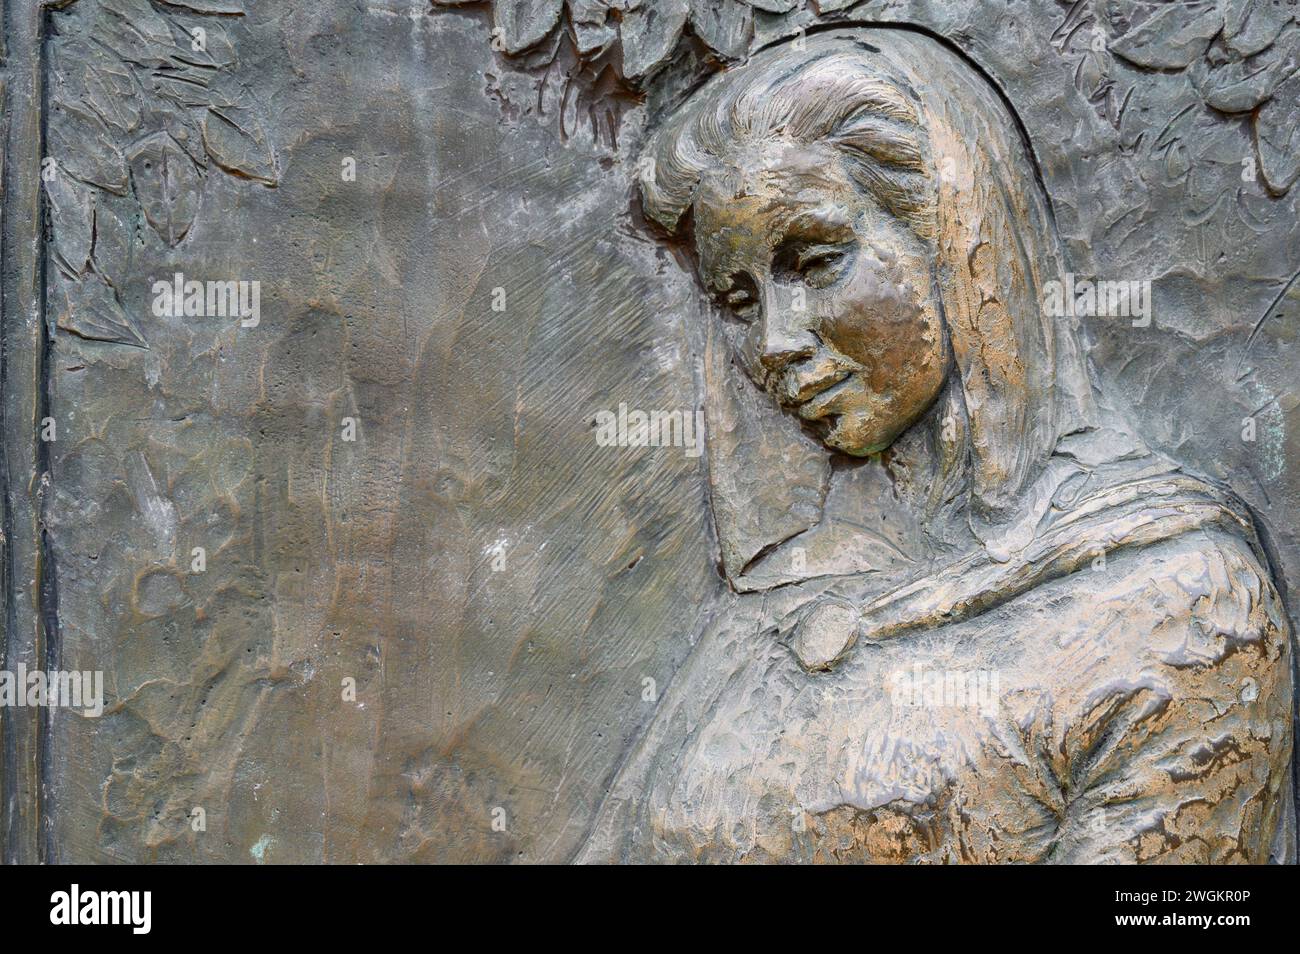 The Visitation – Second Joyful Mystery of the Rosary. A relief sculpture on Mount Podbrdo (the Hill of Apparitions) in Medjugorje. Stock Photo